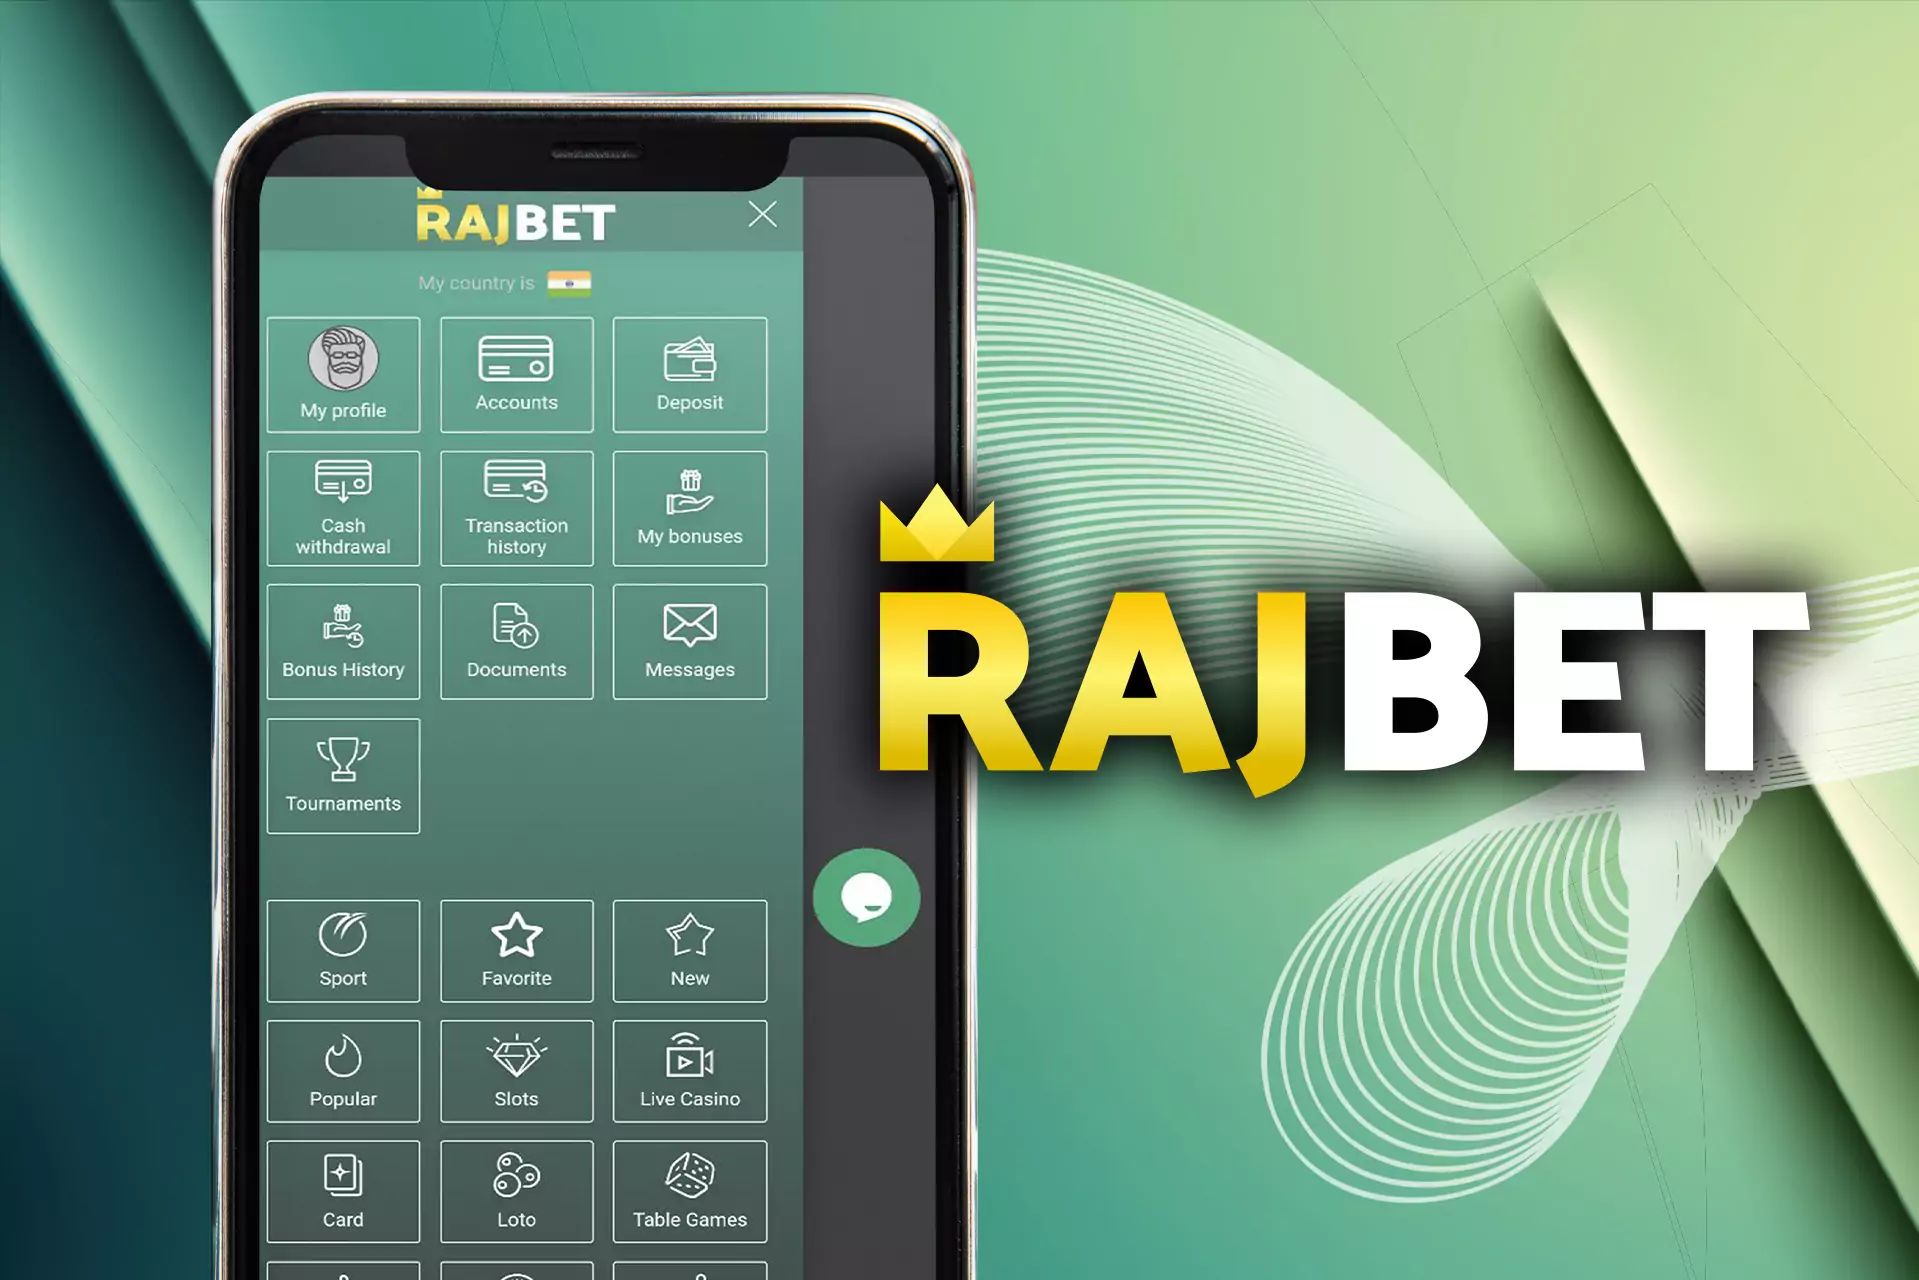 The Rajbet app is great for online sports betting.